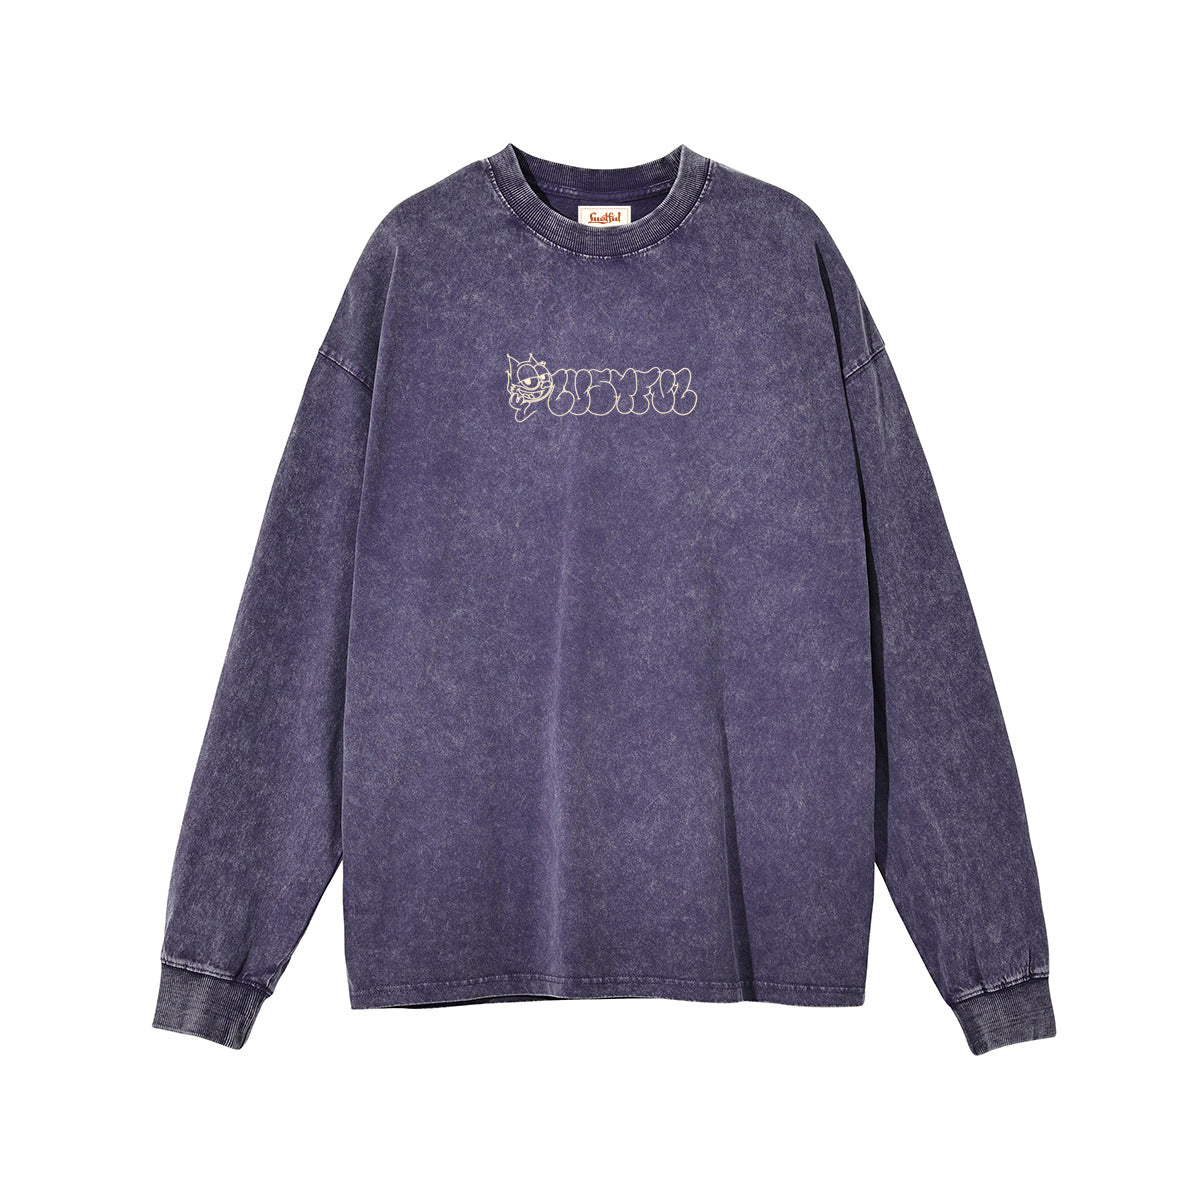 Garlix Throwup LS in washed purple